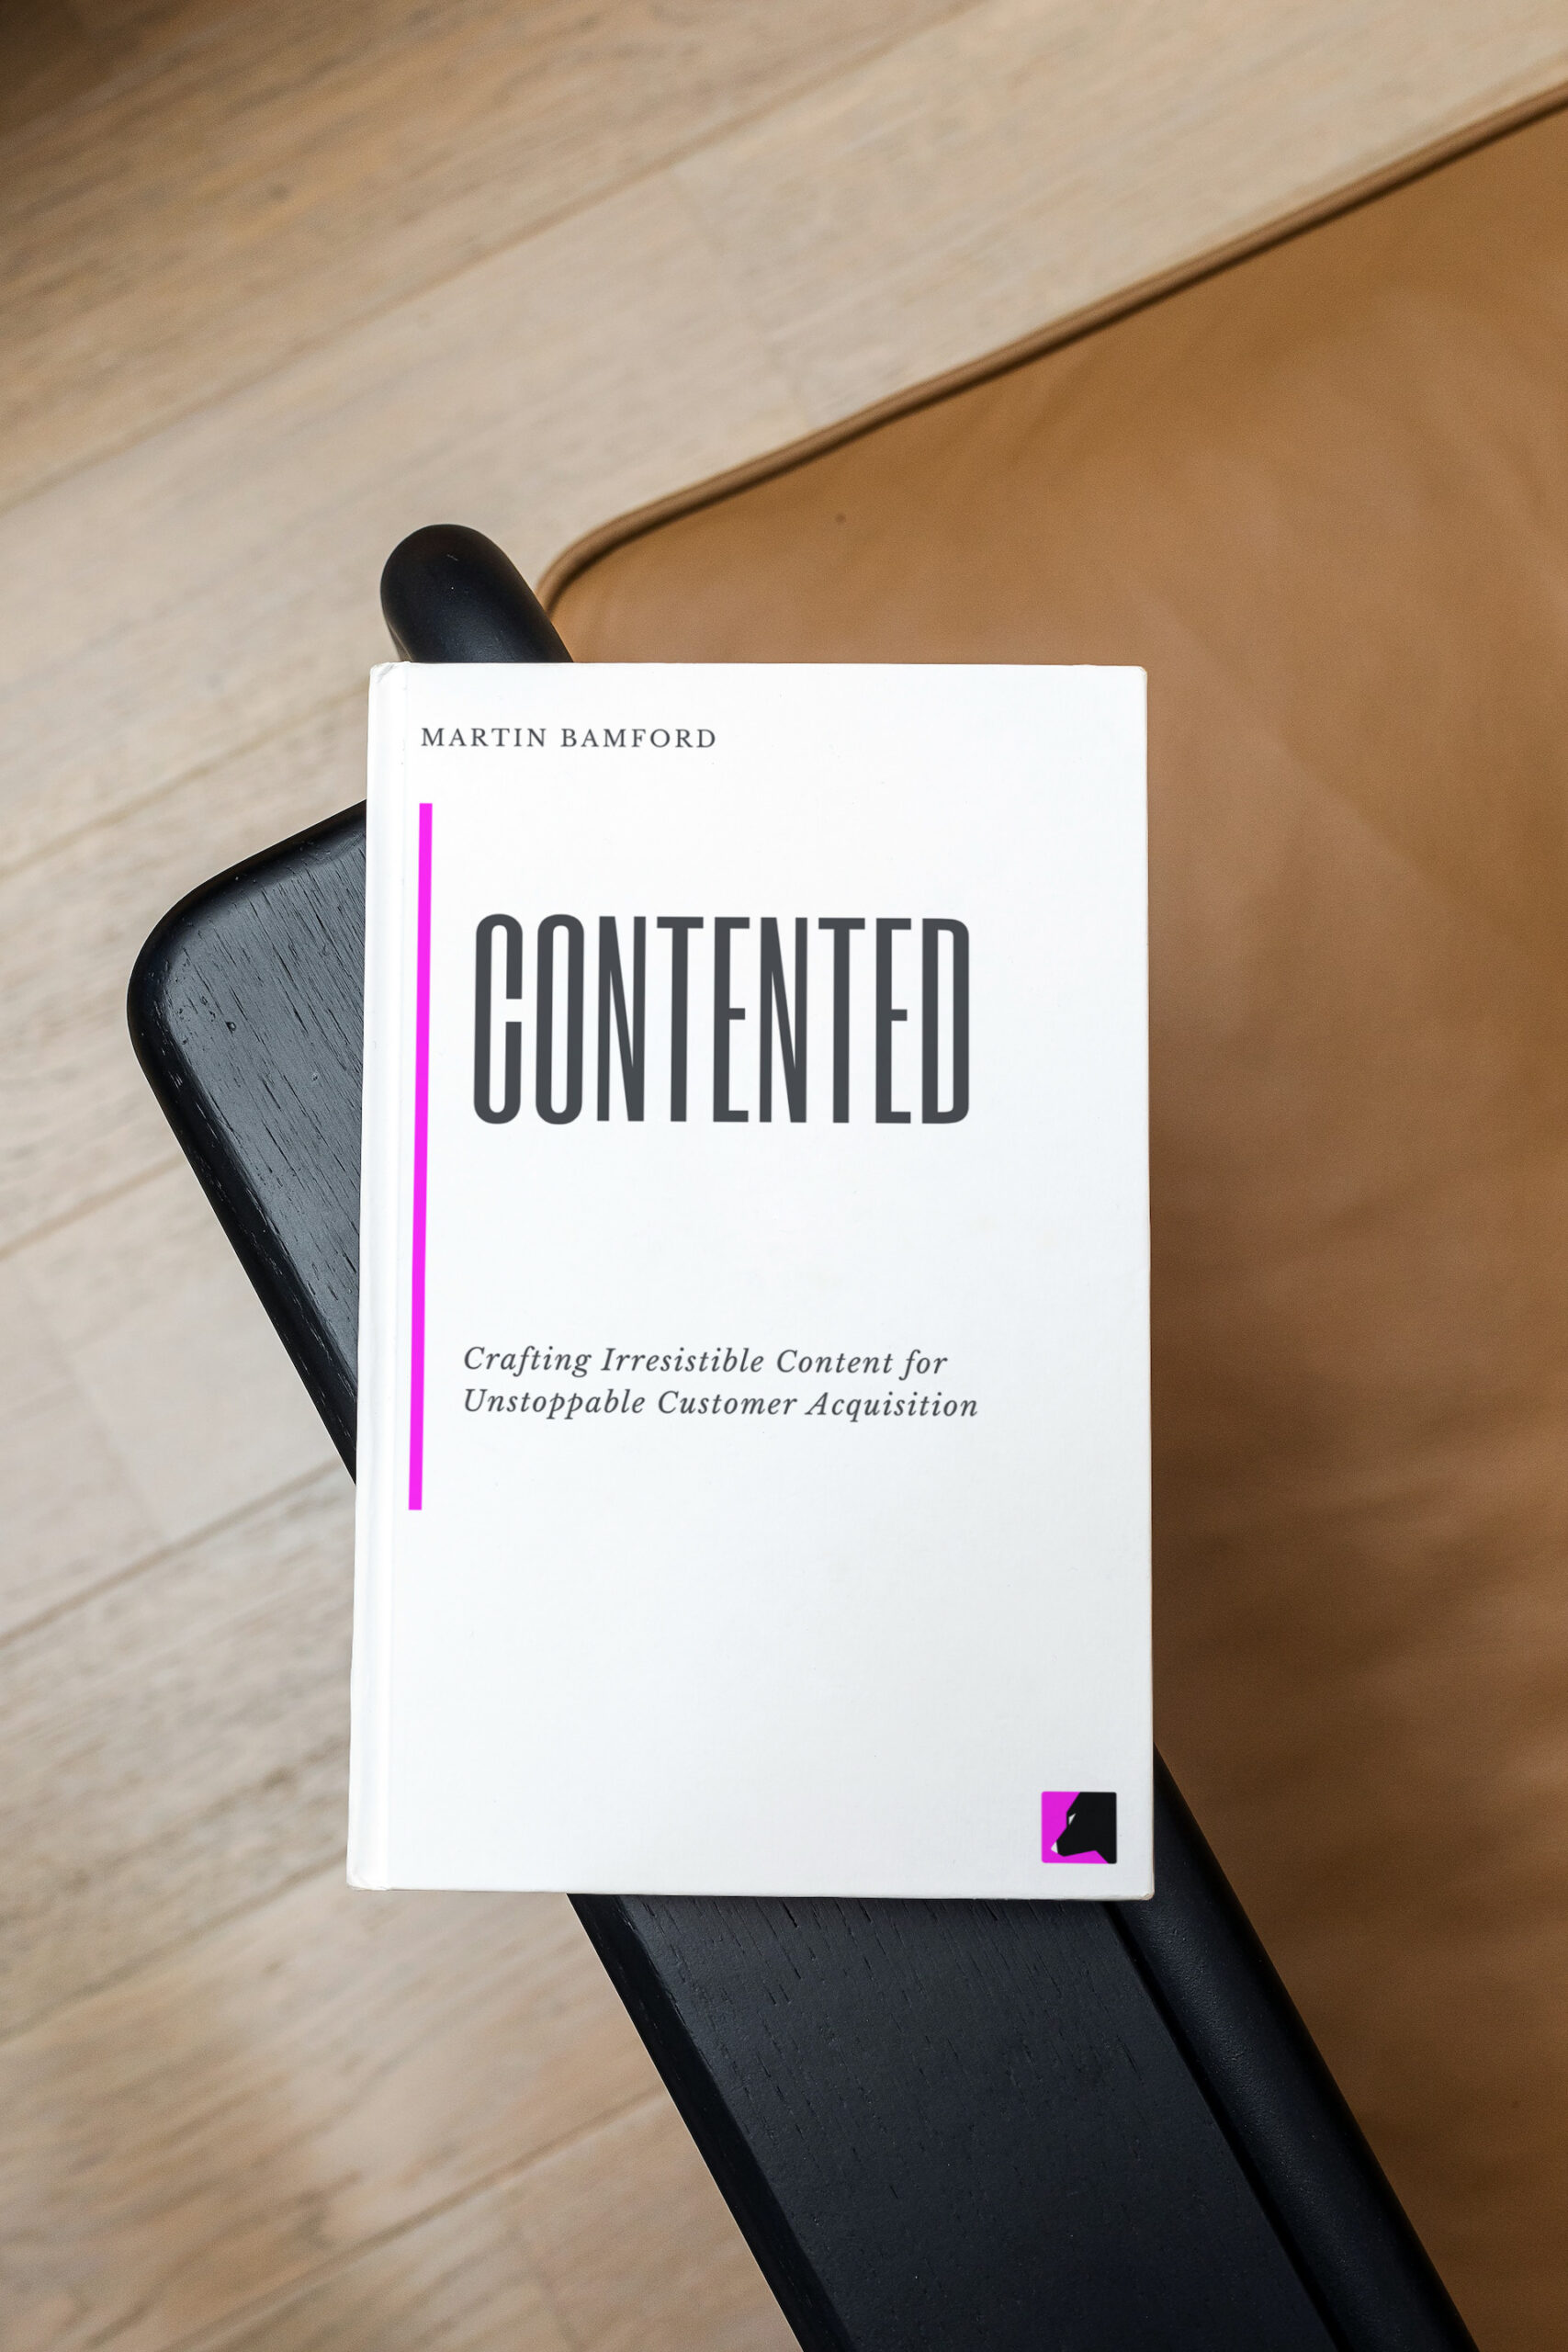 Contented: Crafting Irresistible Content for Unstoppable Customer Acquisition